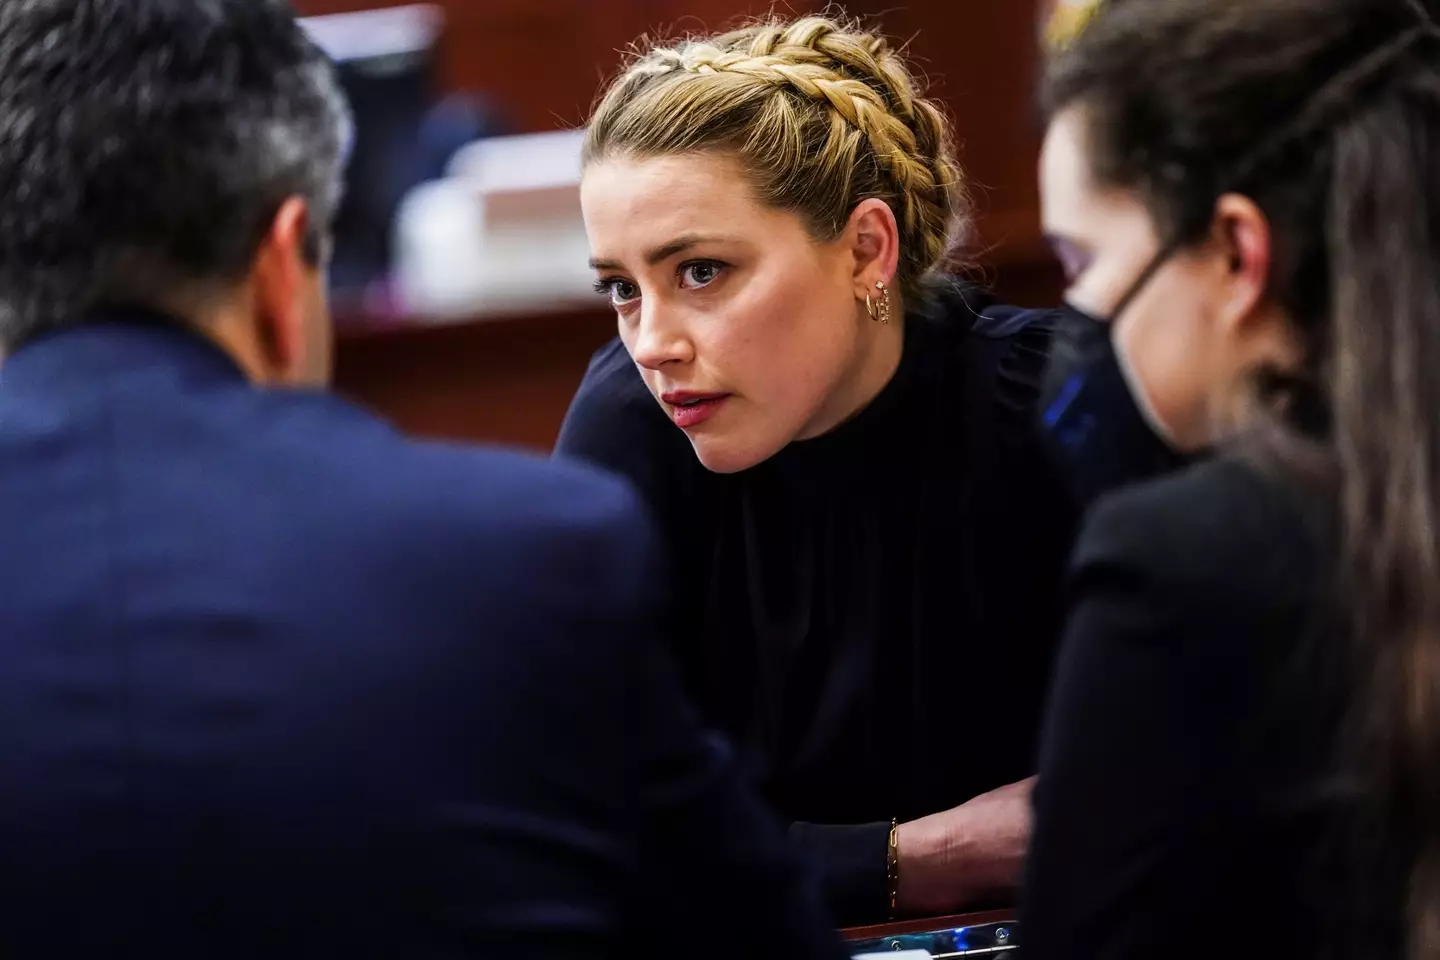 Eva Barlow - a supporter of Amber Heard - was caught using her phone in the courtroom in breach of a court order.